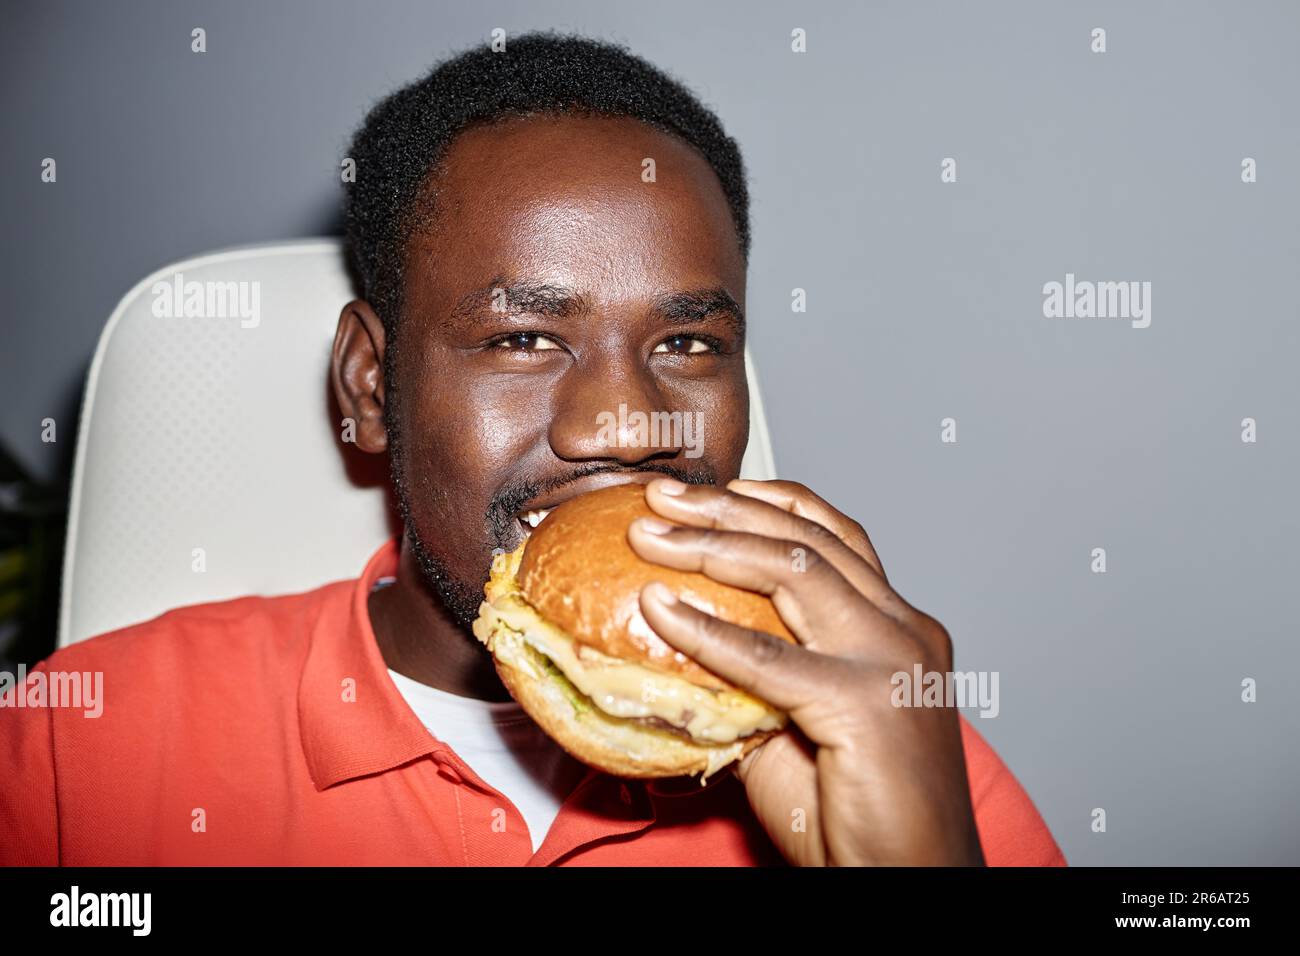 Closeup portrait of black man eating burger indoors and looking at camera happily shot with flash, copy space Stock Photo